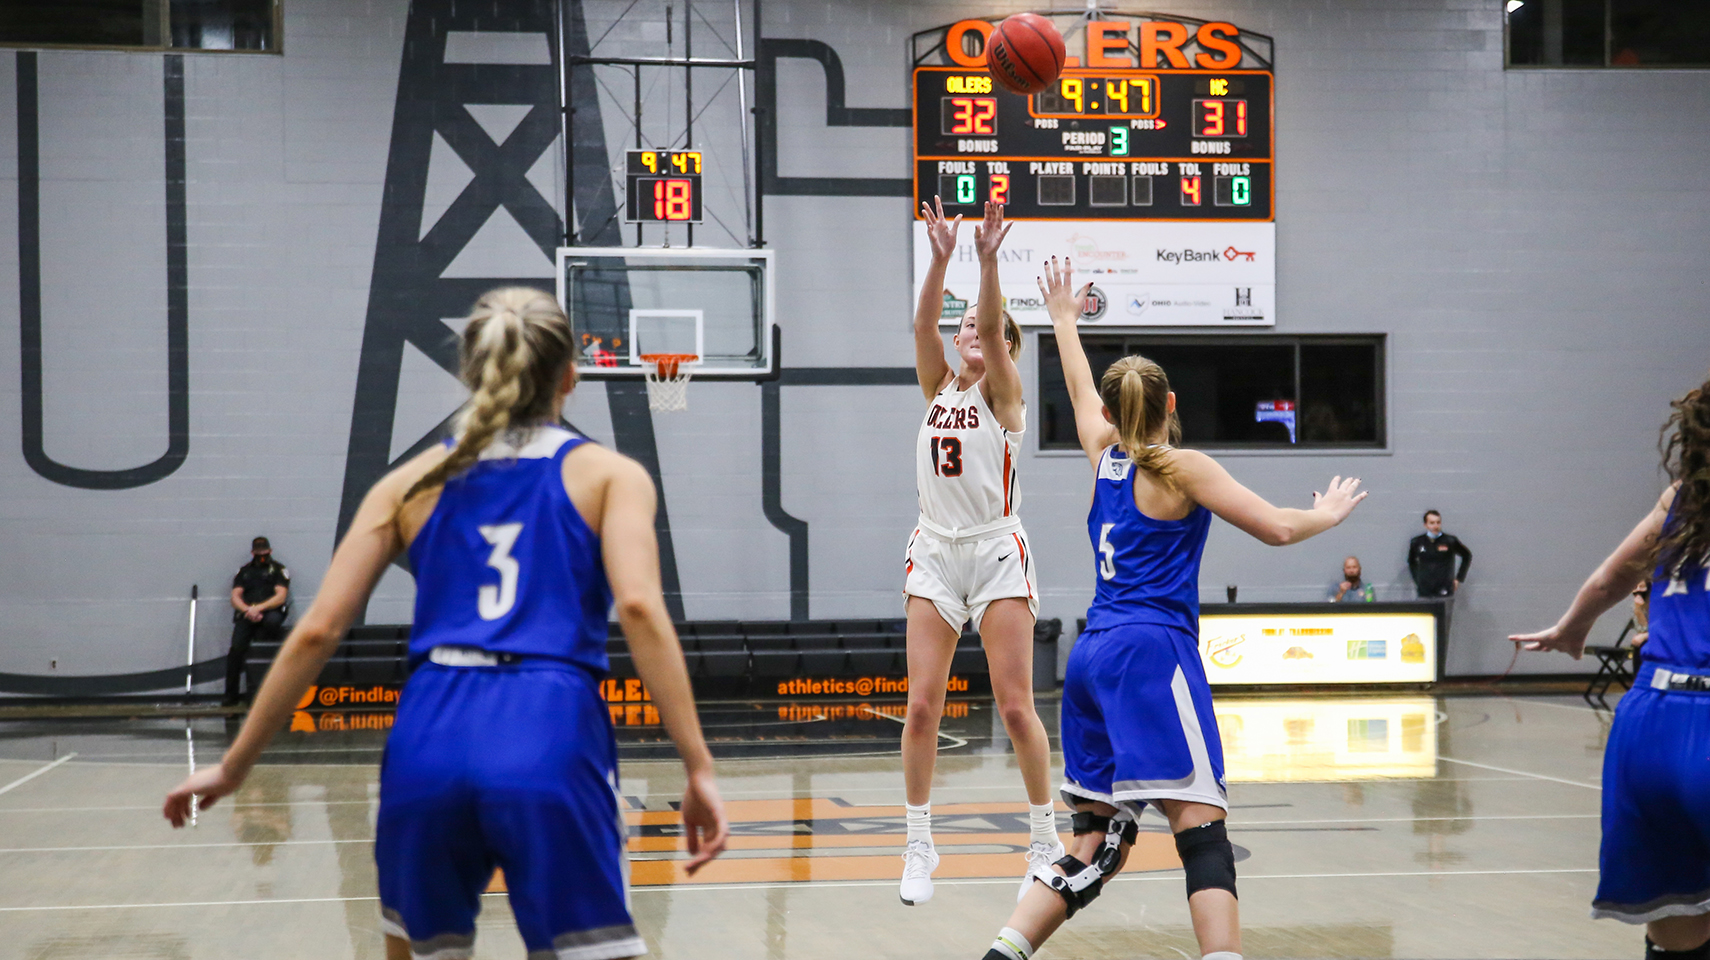 Women's basketball player in white shooting a three pointer.